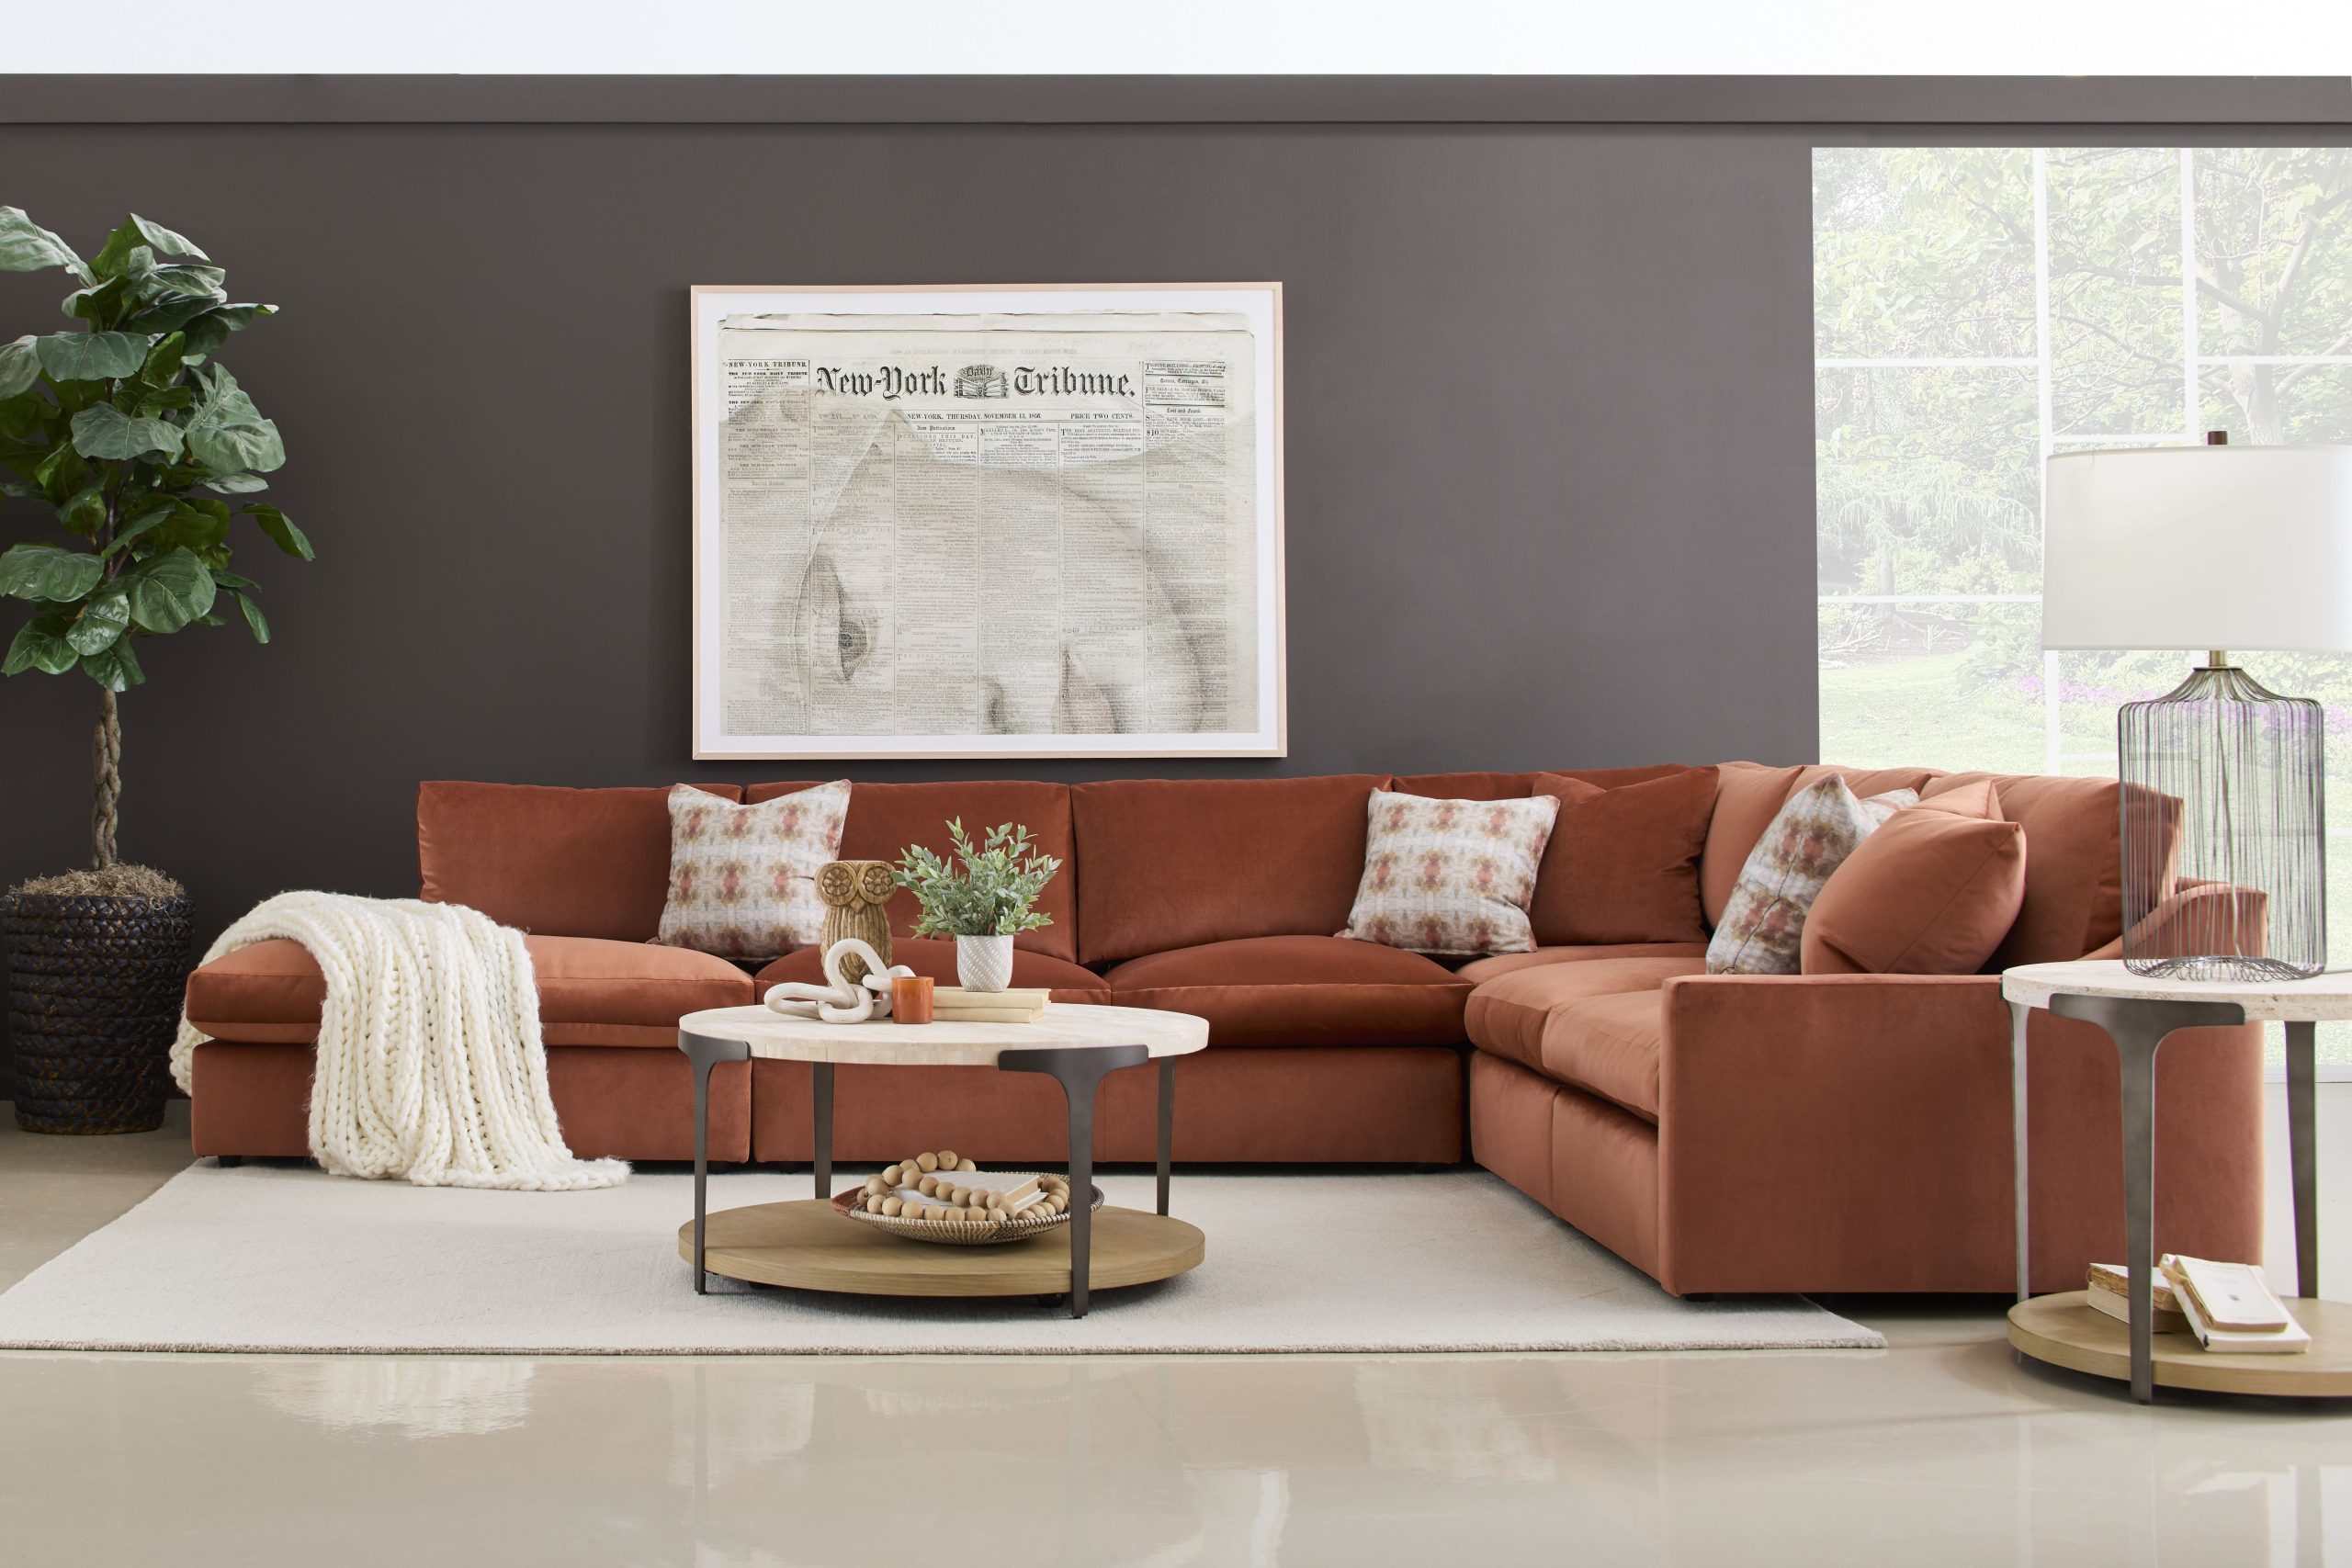 Fall living room decorating ideas from EF Brannon include a Flexsteel sofa.